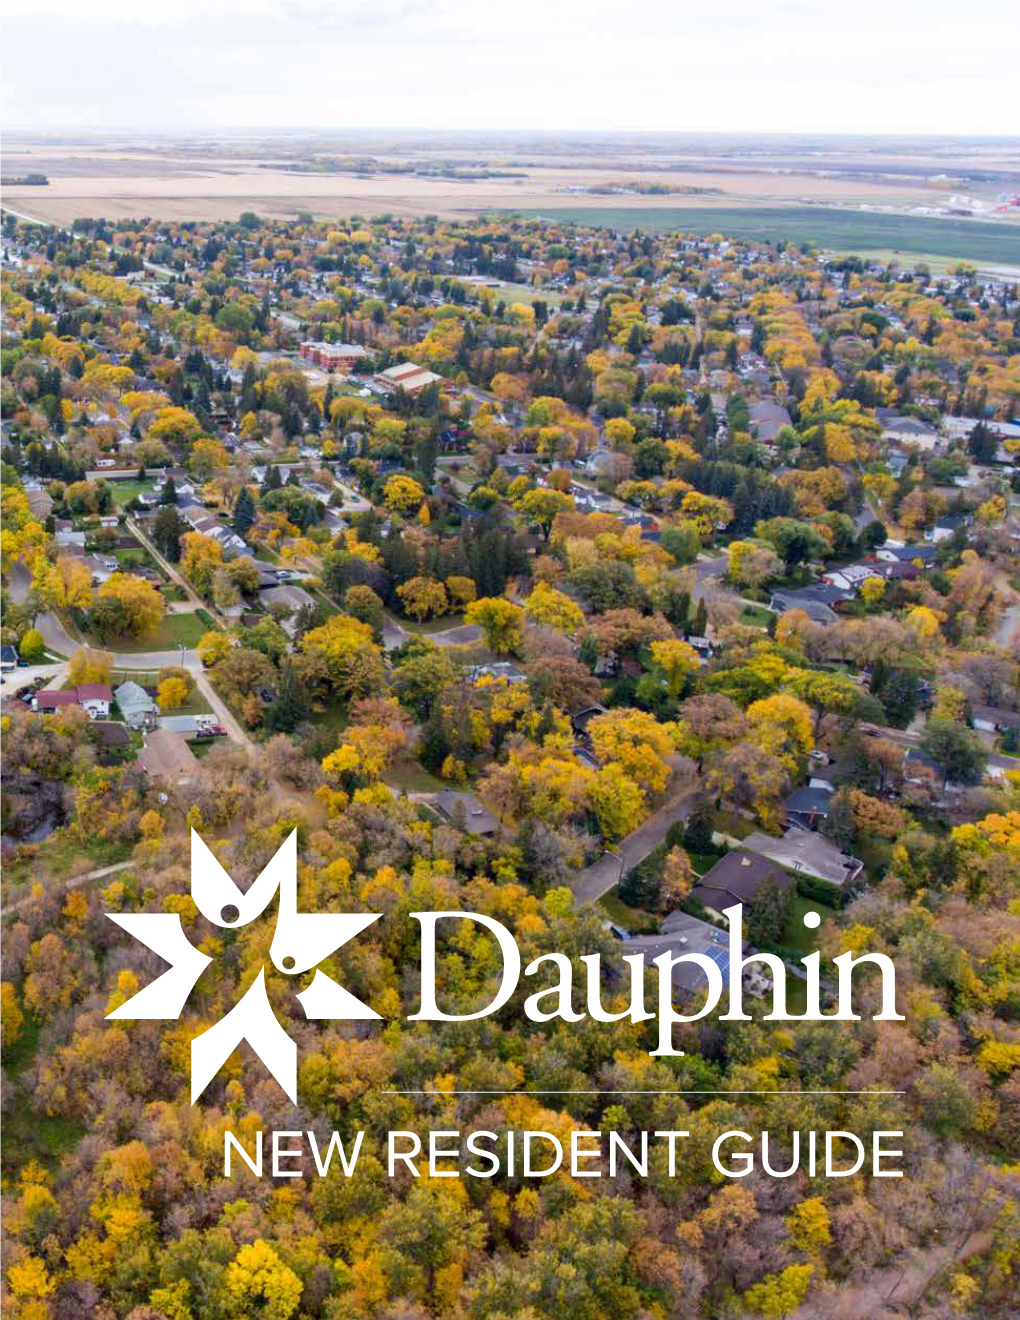 Download a PDF of the Dauphin New Resident Guide